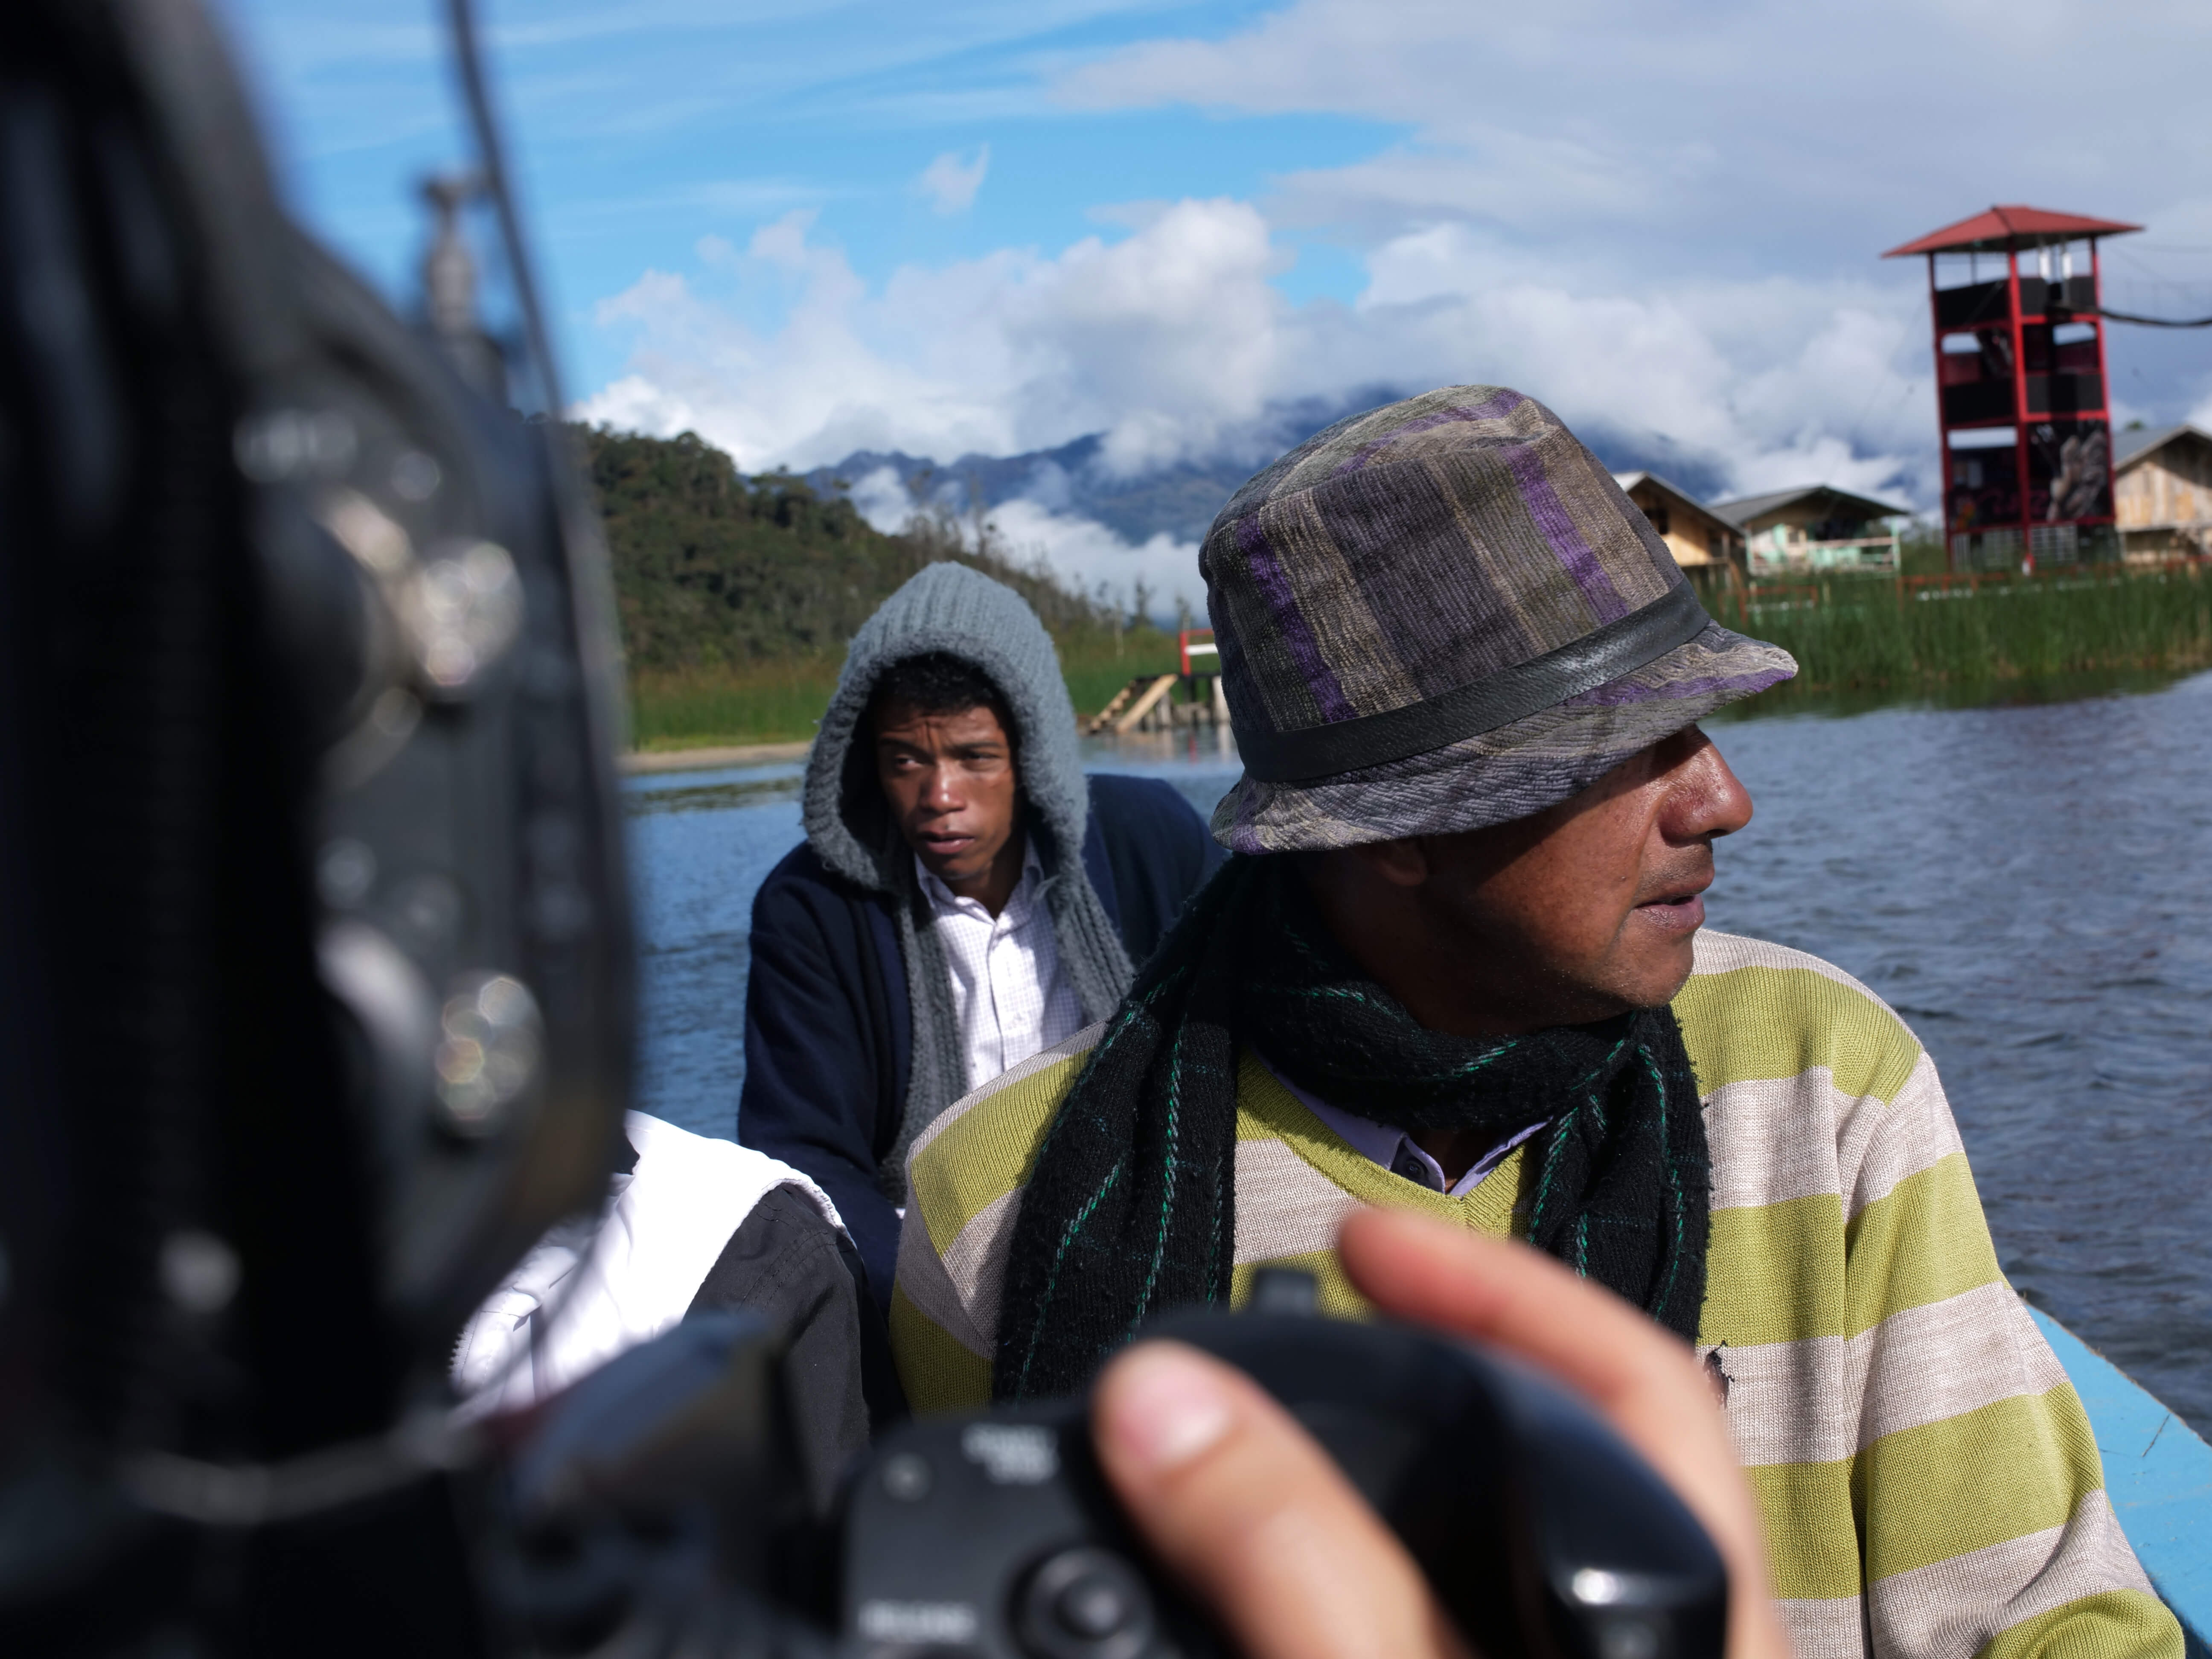 Production still of Paths of Fire. Over the shoulder shot of three men traveling on a boat, they are wearing warm clothing.